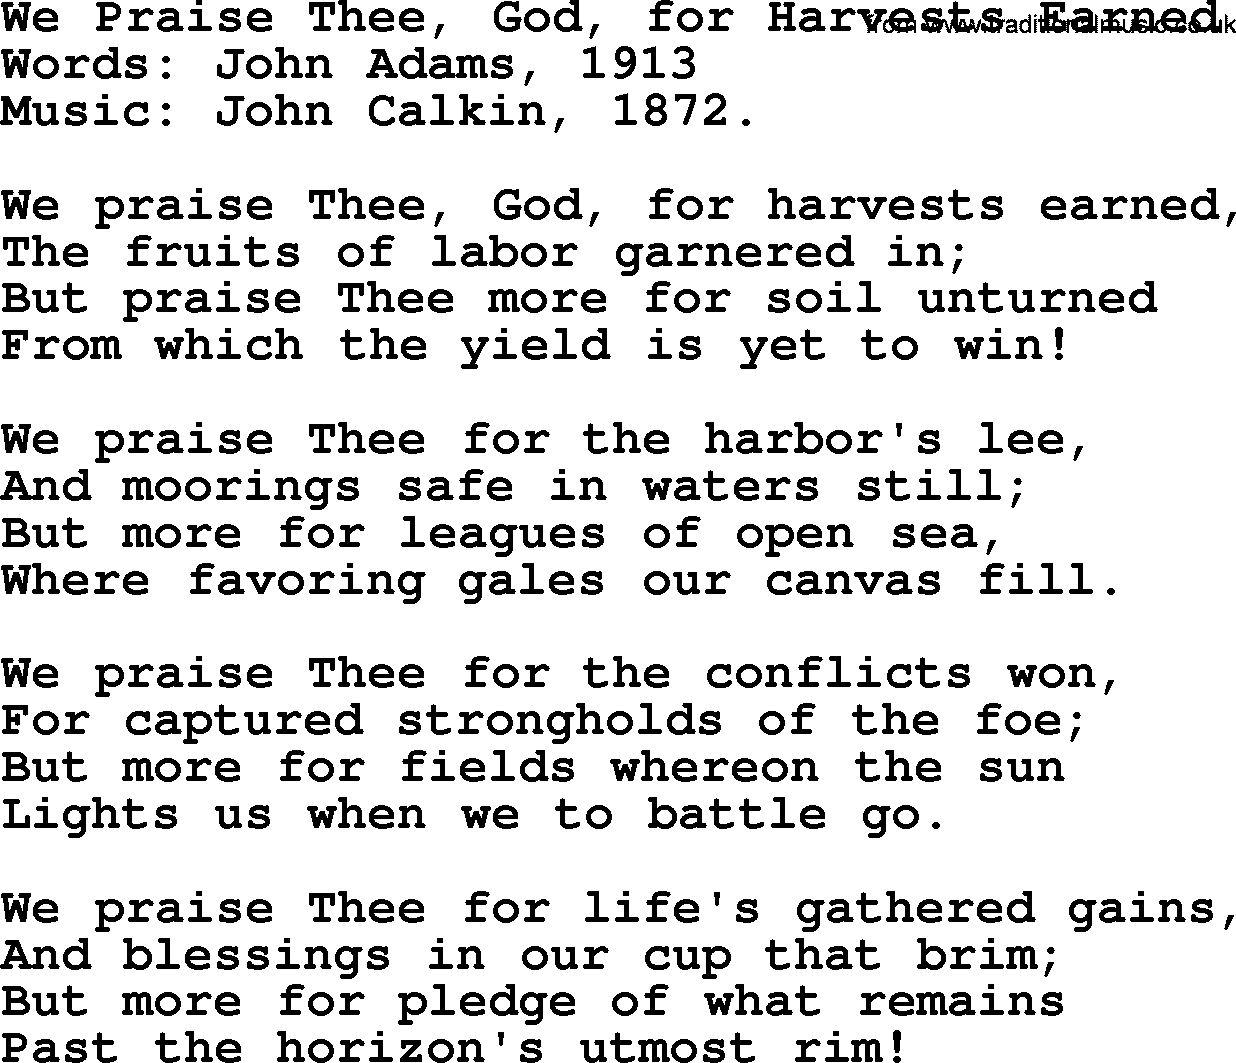 Thanksgiving Hymns and Songs: We Praise Thee, God, For Harvests Earned lyrics with PDF